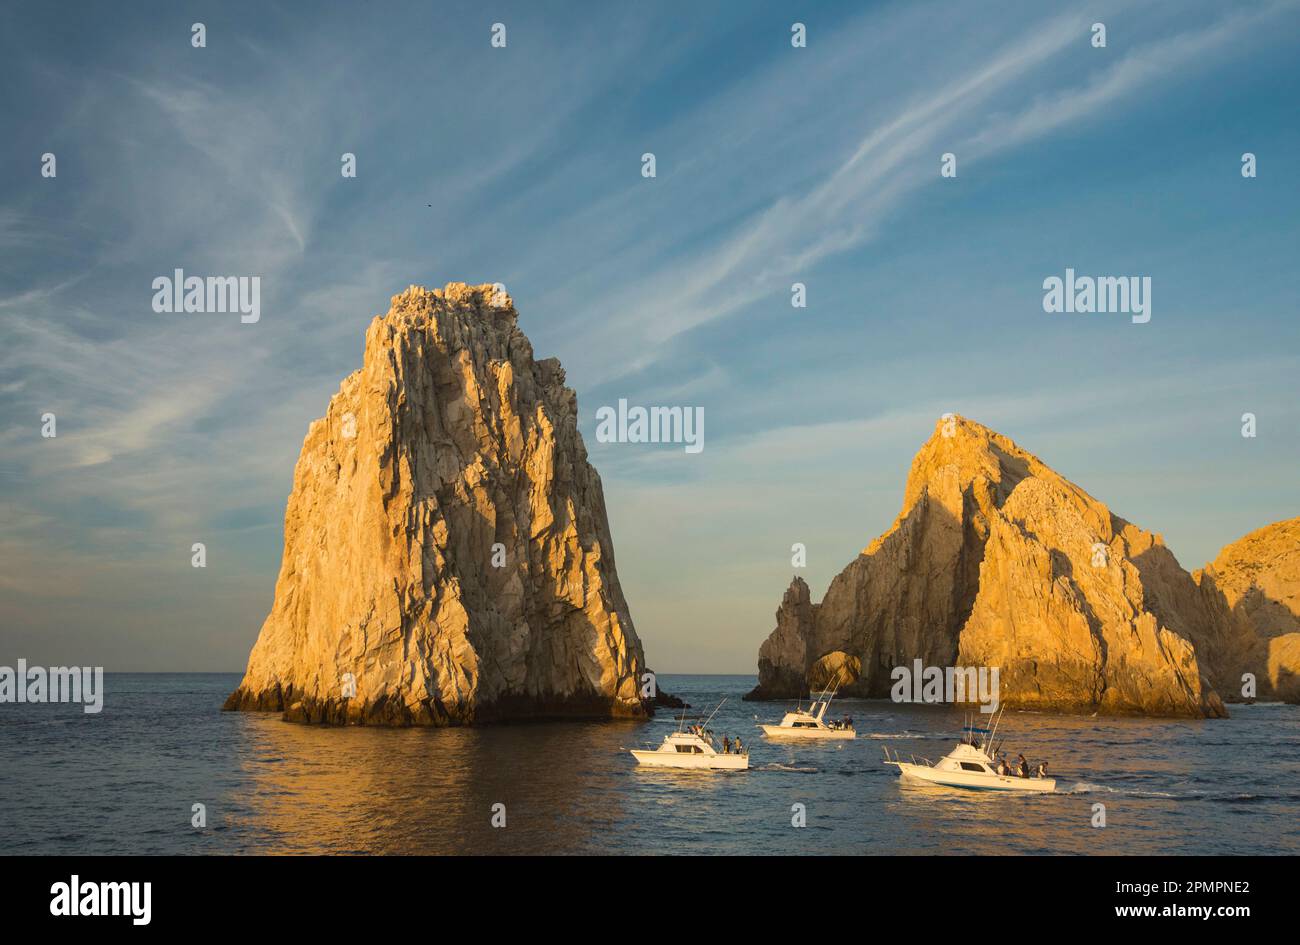 Land's End, at the tip of Baja at Cabo San Lucas. Stock Photo